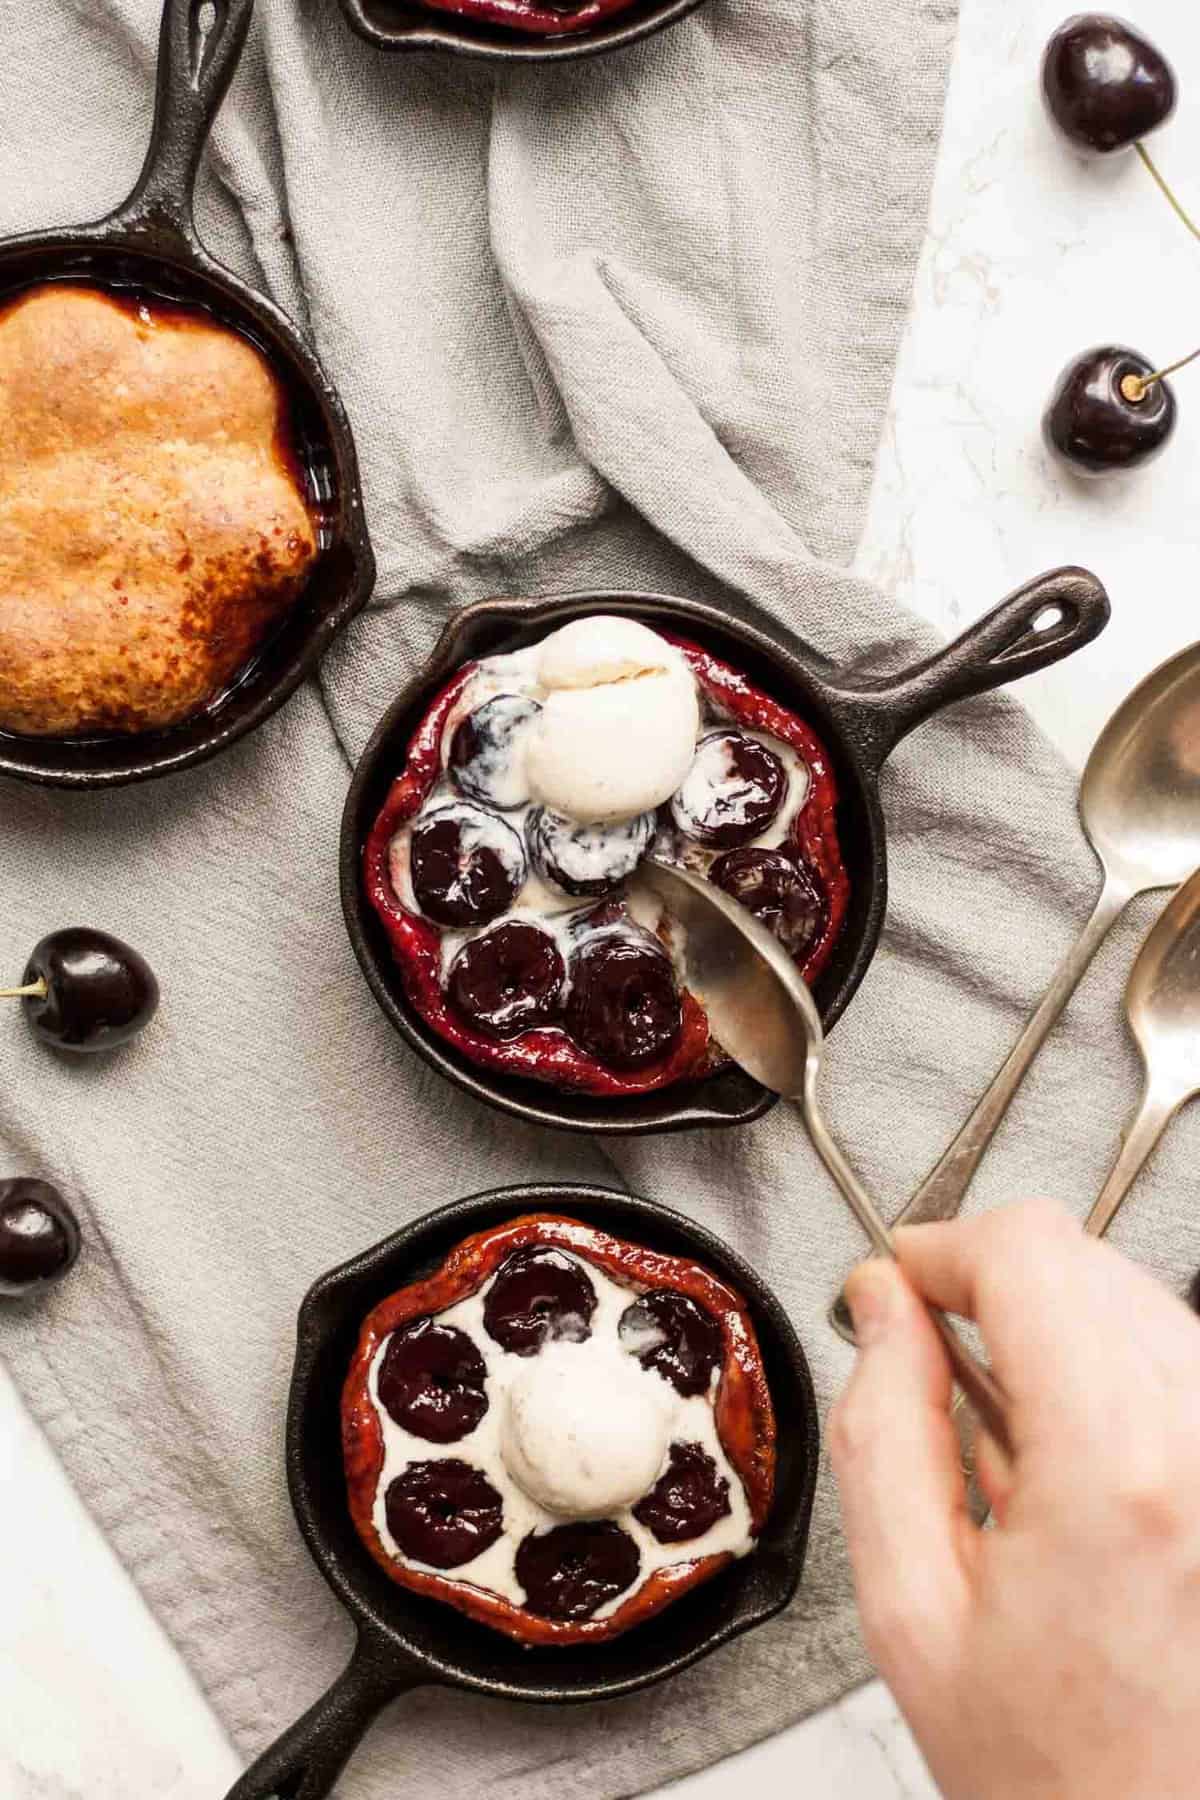 three cherry tarte tatin with someone dipping a spoon into it.